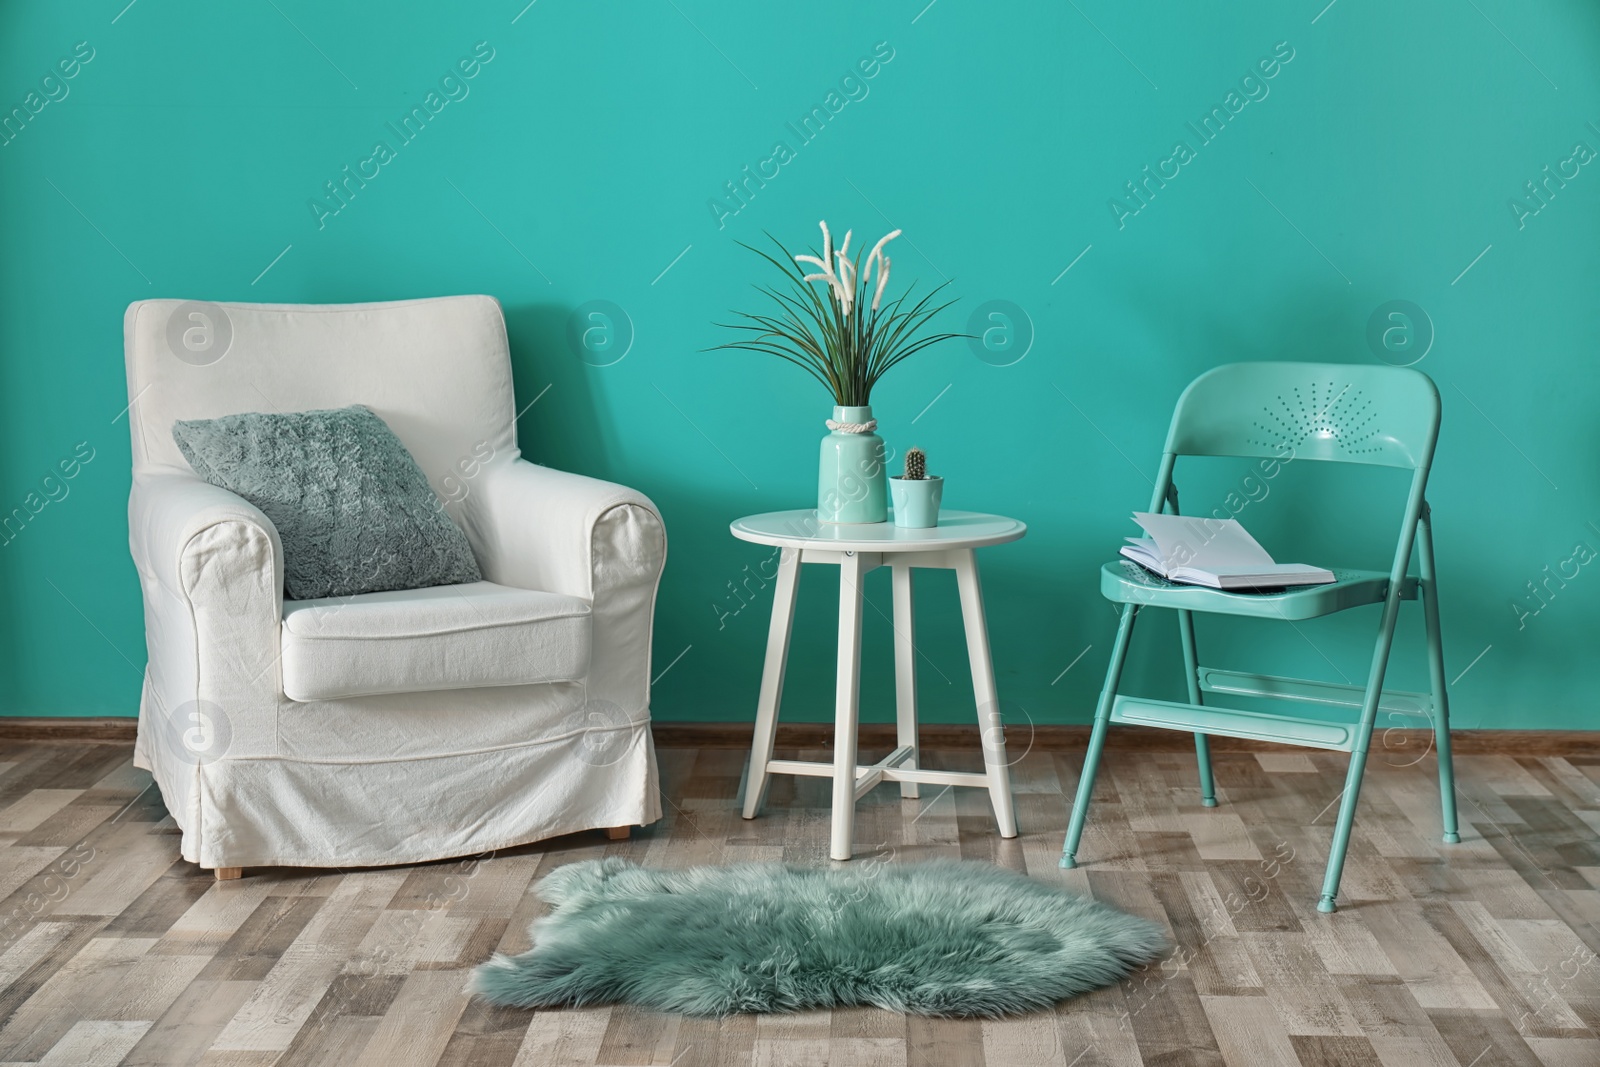 Photo of Stylish room interior with mint decor elements